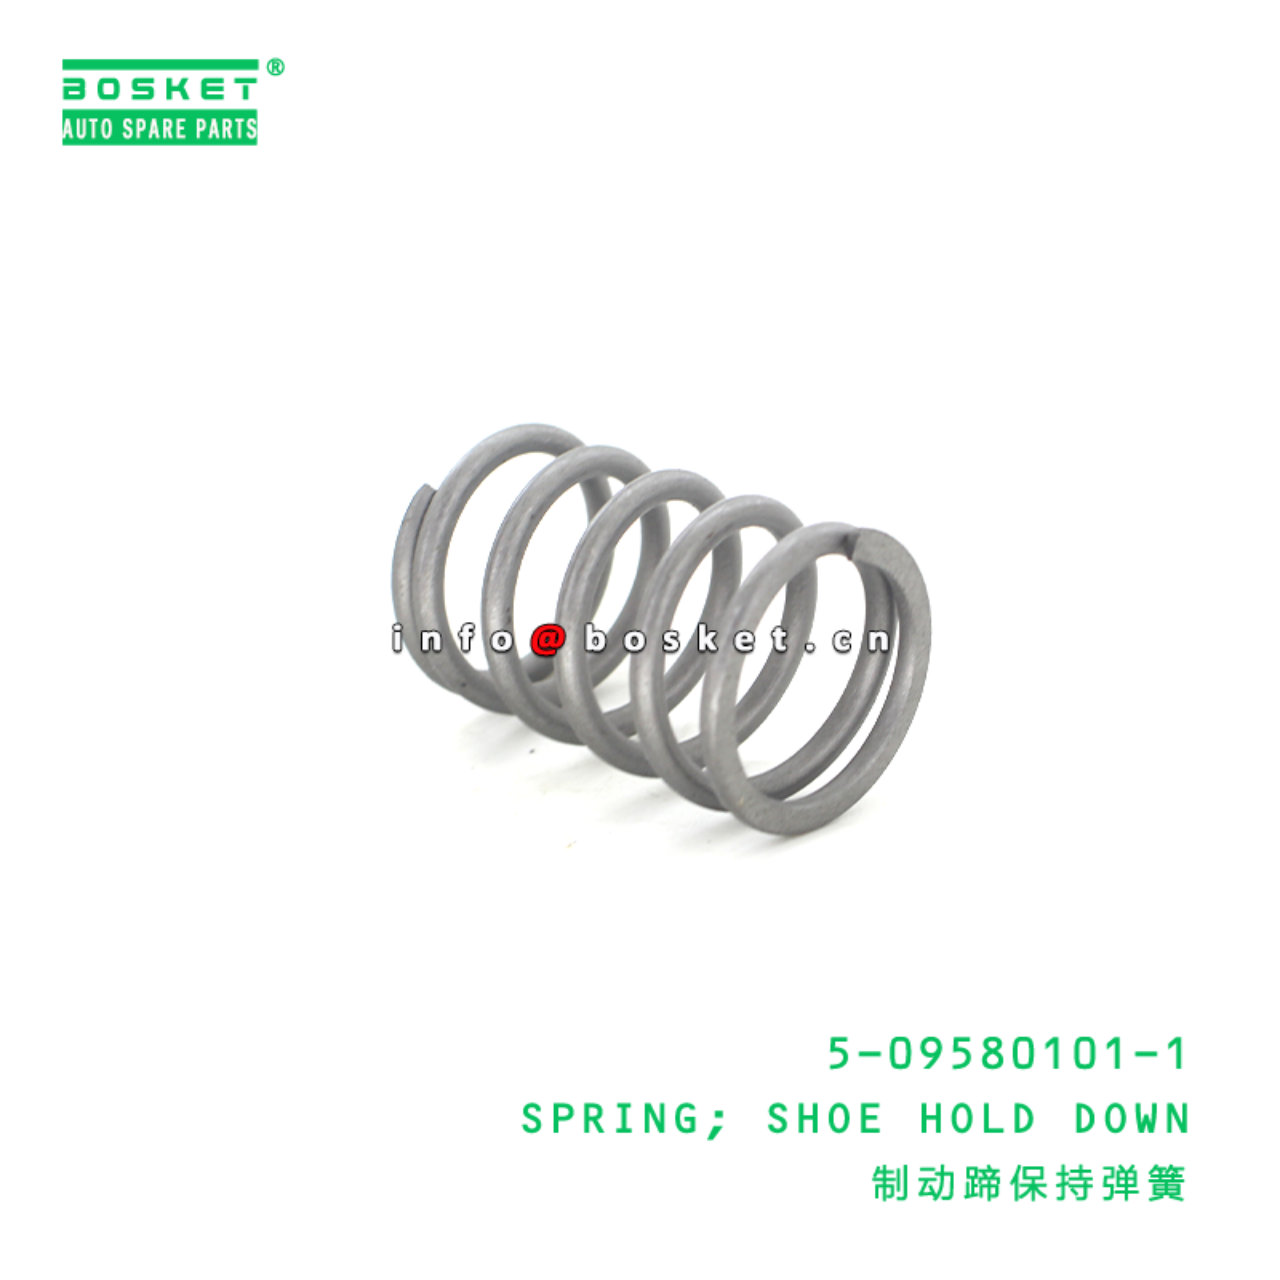  5-09580101-1 Shoe Hold Down Spring 5095801011 Suitable for ISUZU NKR NPR